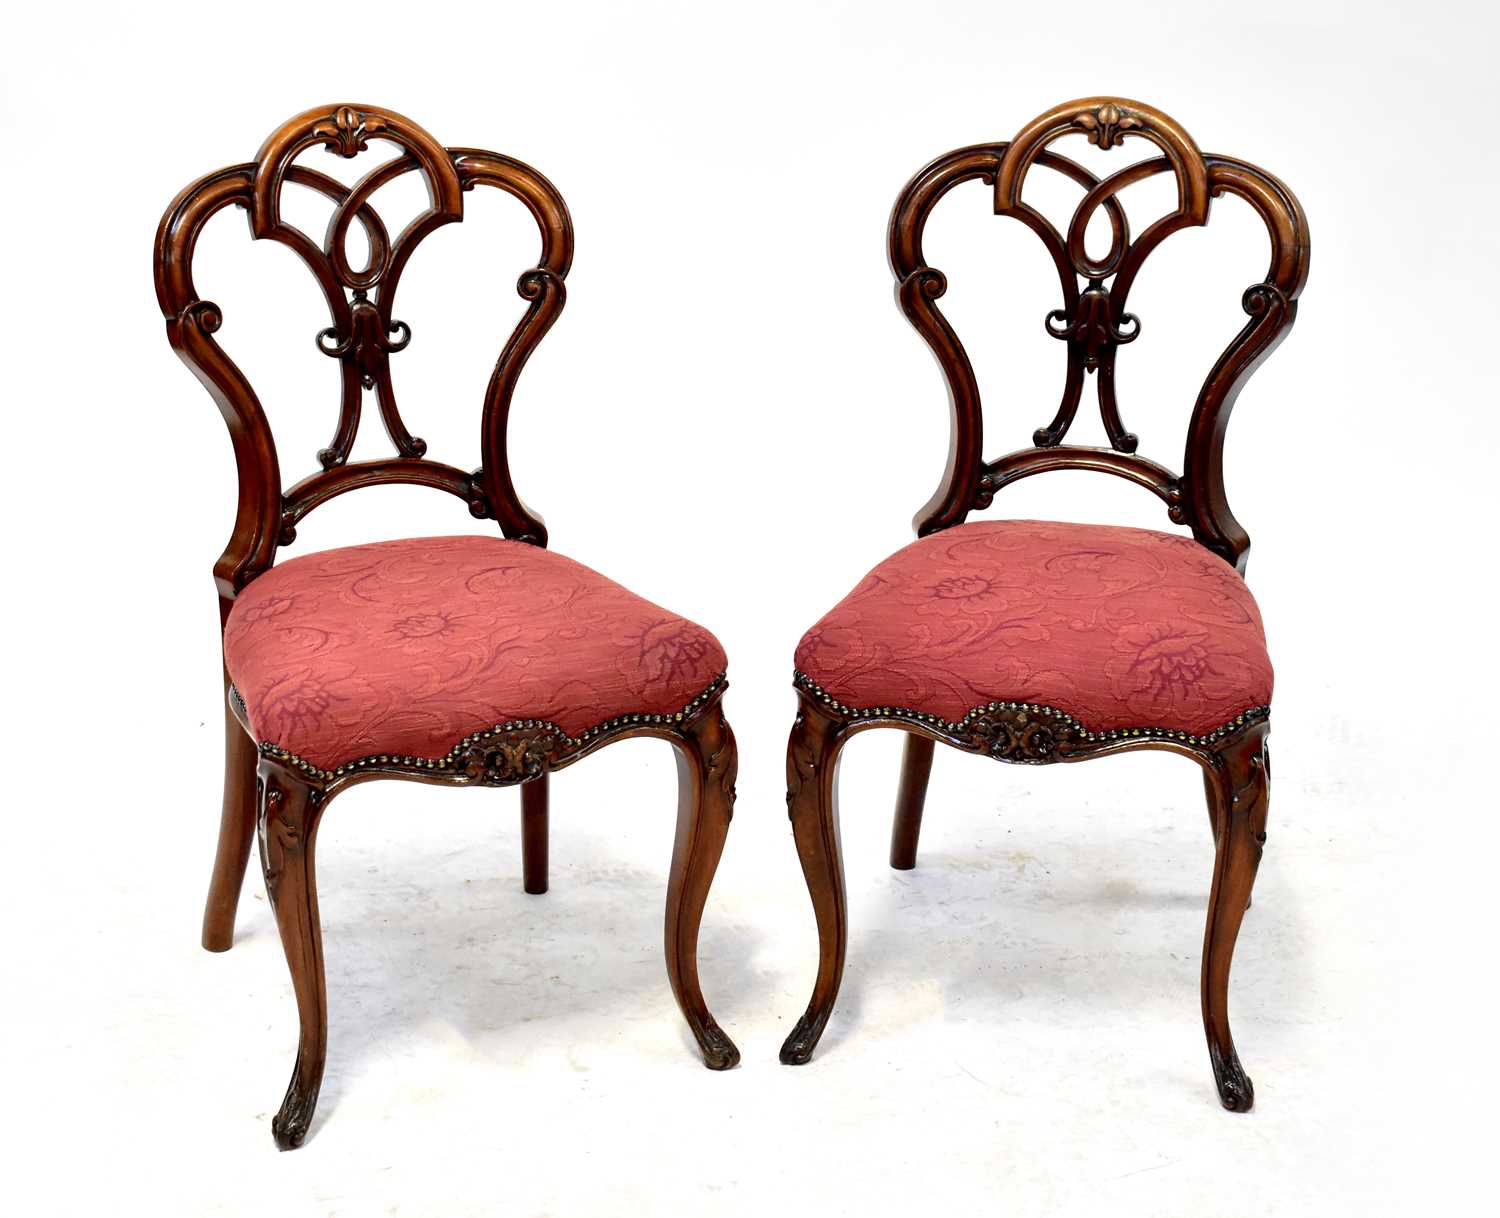 A set of six late 19th century walnut dining chairs with open pierced balloon backs, flowerhead